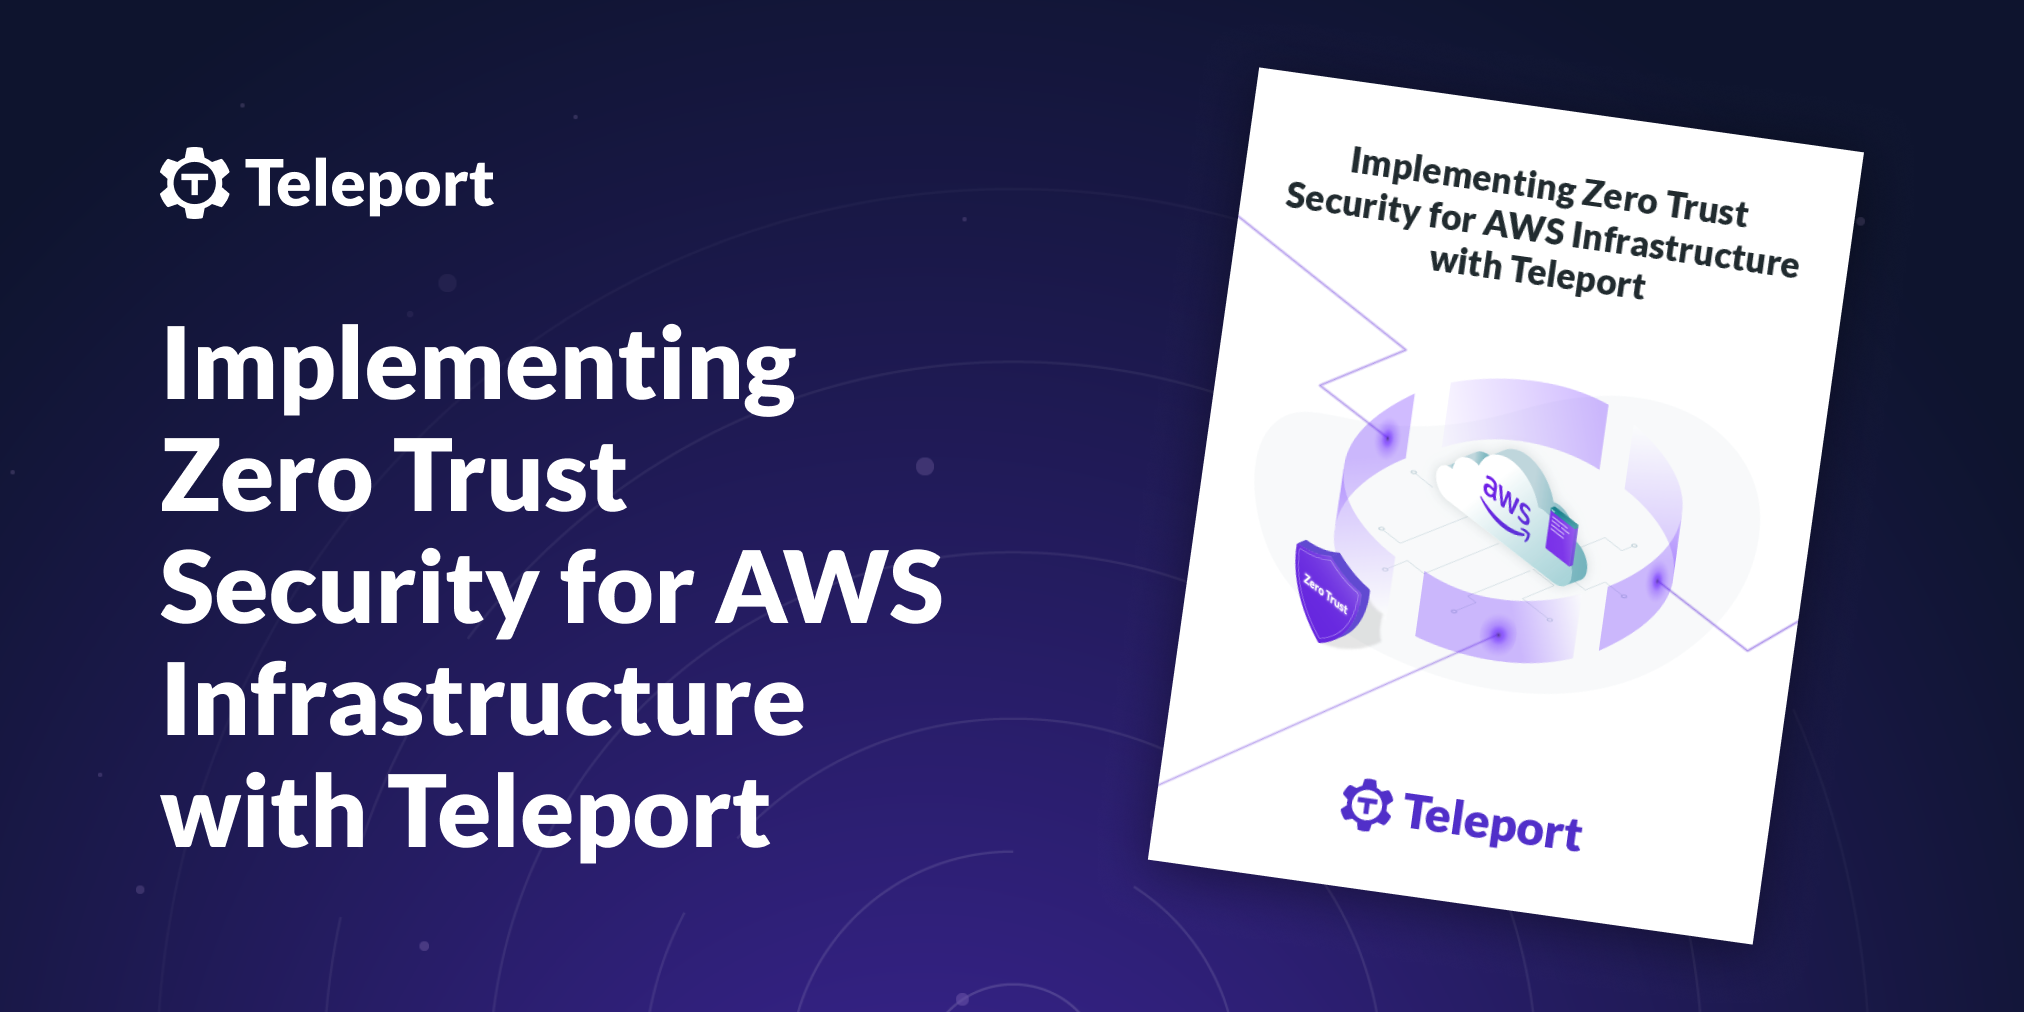 Implementing Zero Trust Security for AWS Infrastructure with Teleport